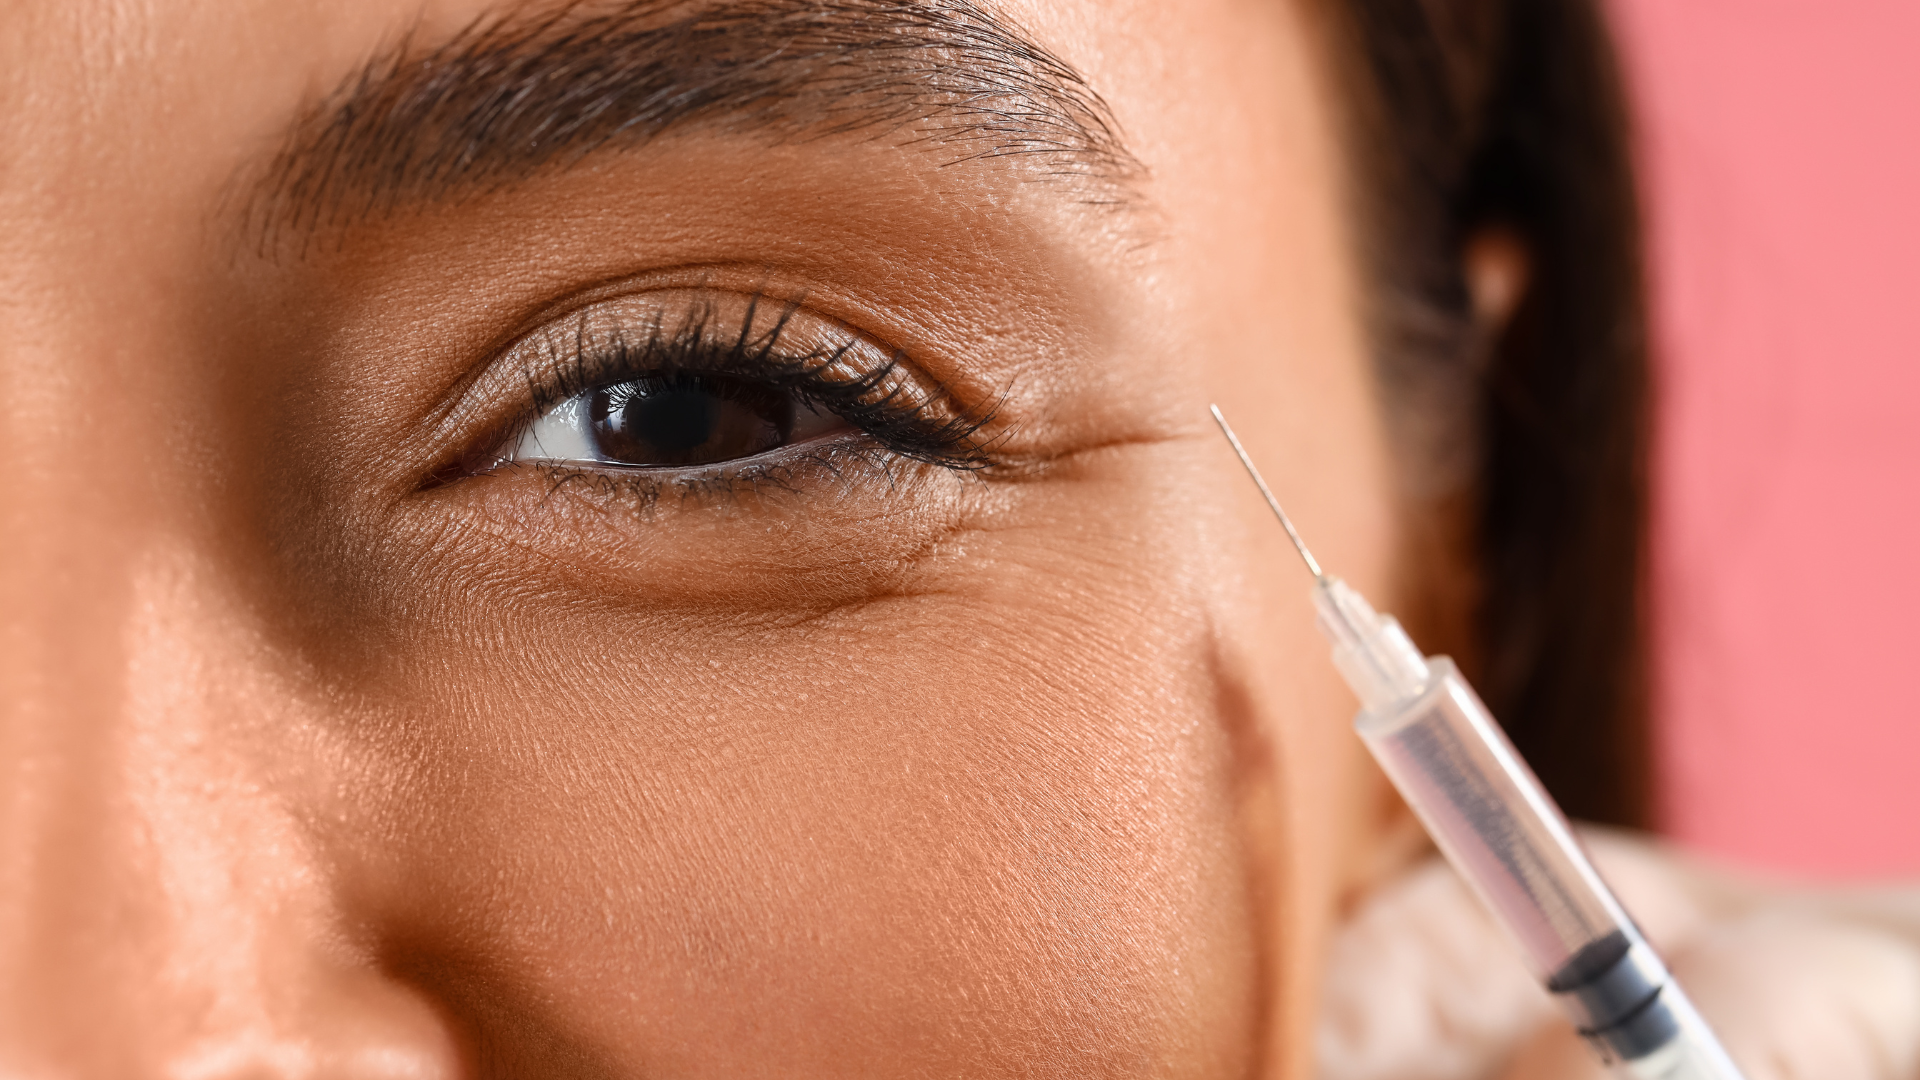 An excited woman receives under eye injection for facial rejuvenation.